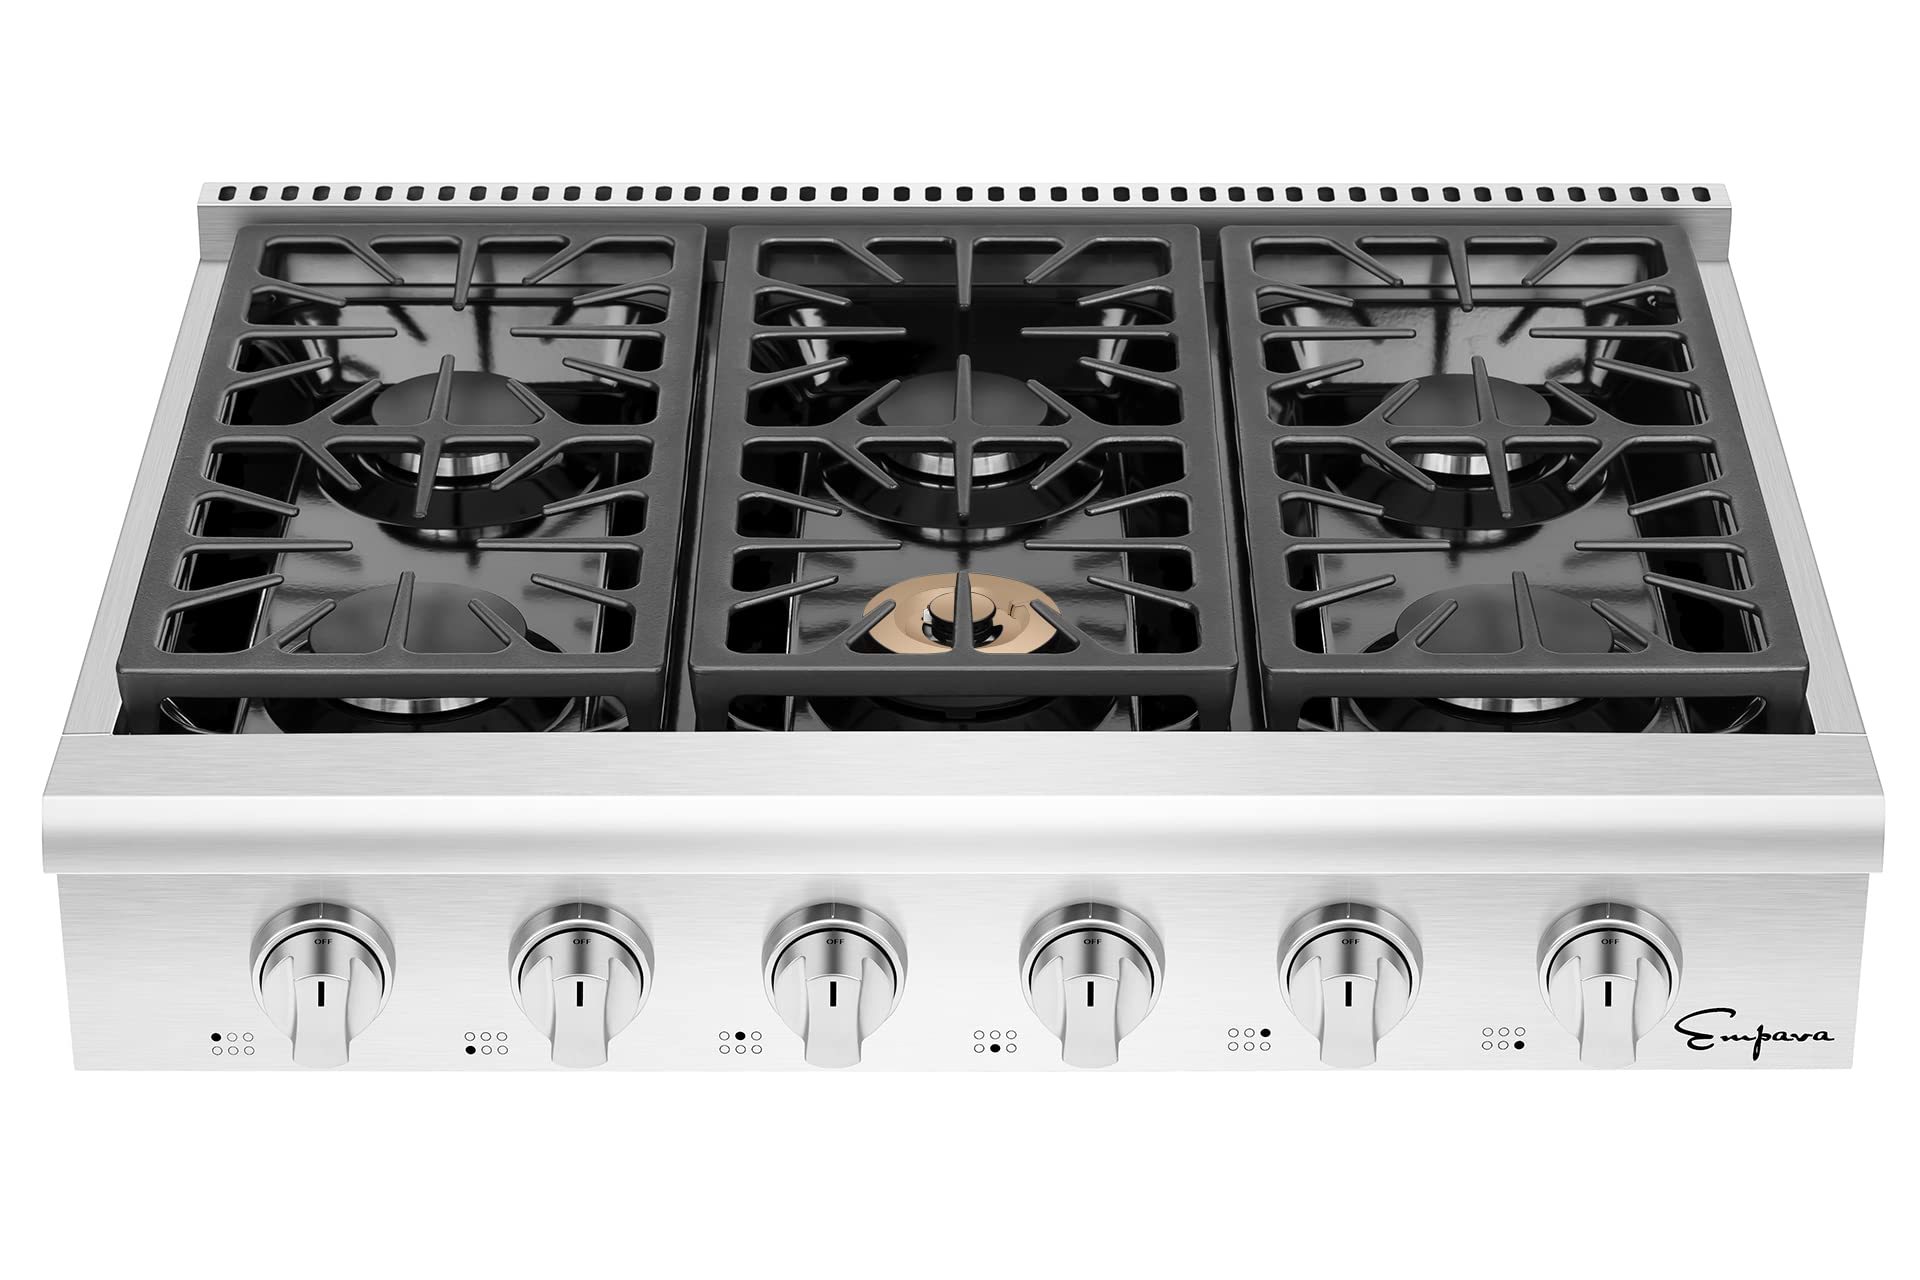 Empava 36 in. Pro-Style Professional Slide-in Natural Gas Rangetop with 6 Deep Recessed Sealed Ultra High-Low Burners-Heavy Duty Continuous Grates in Stainless Steel, 36 Inch, Silver